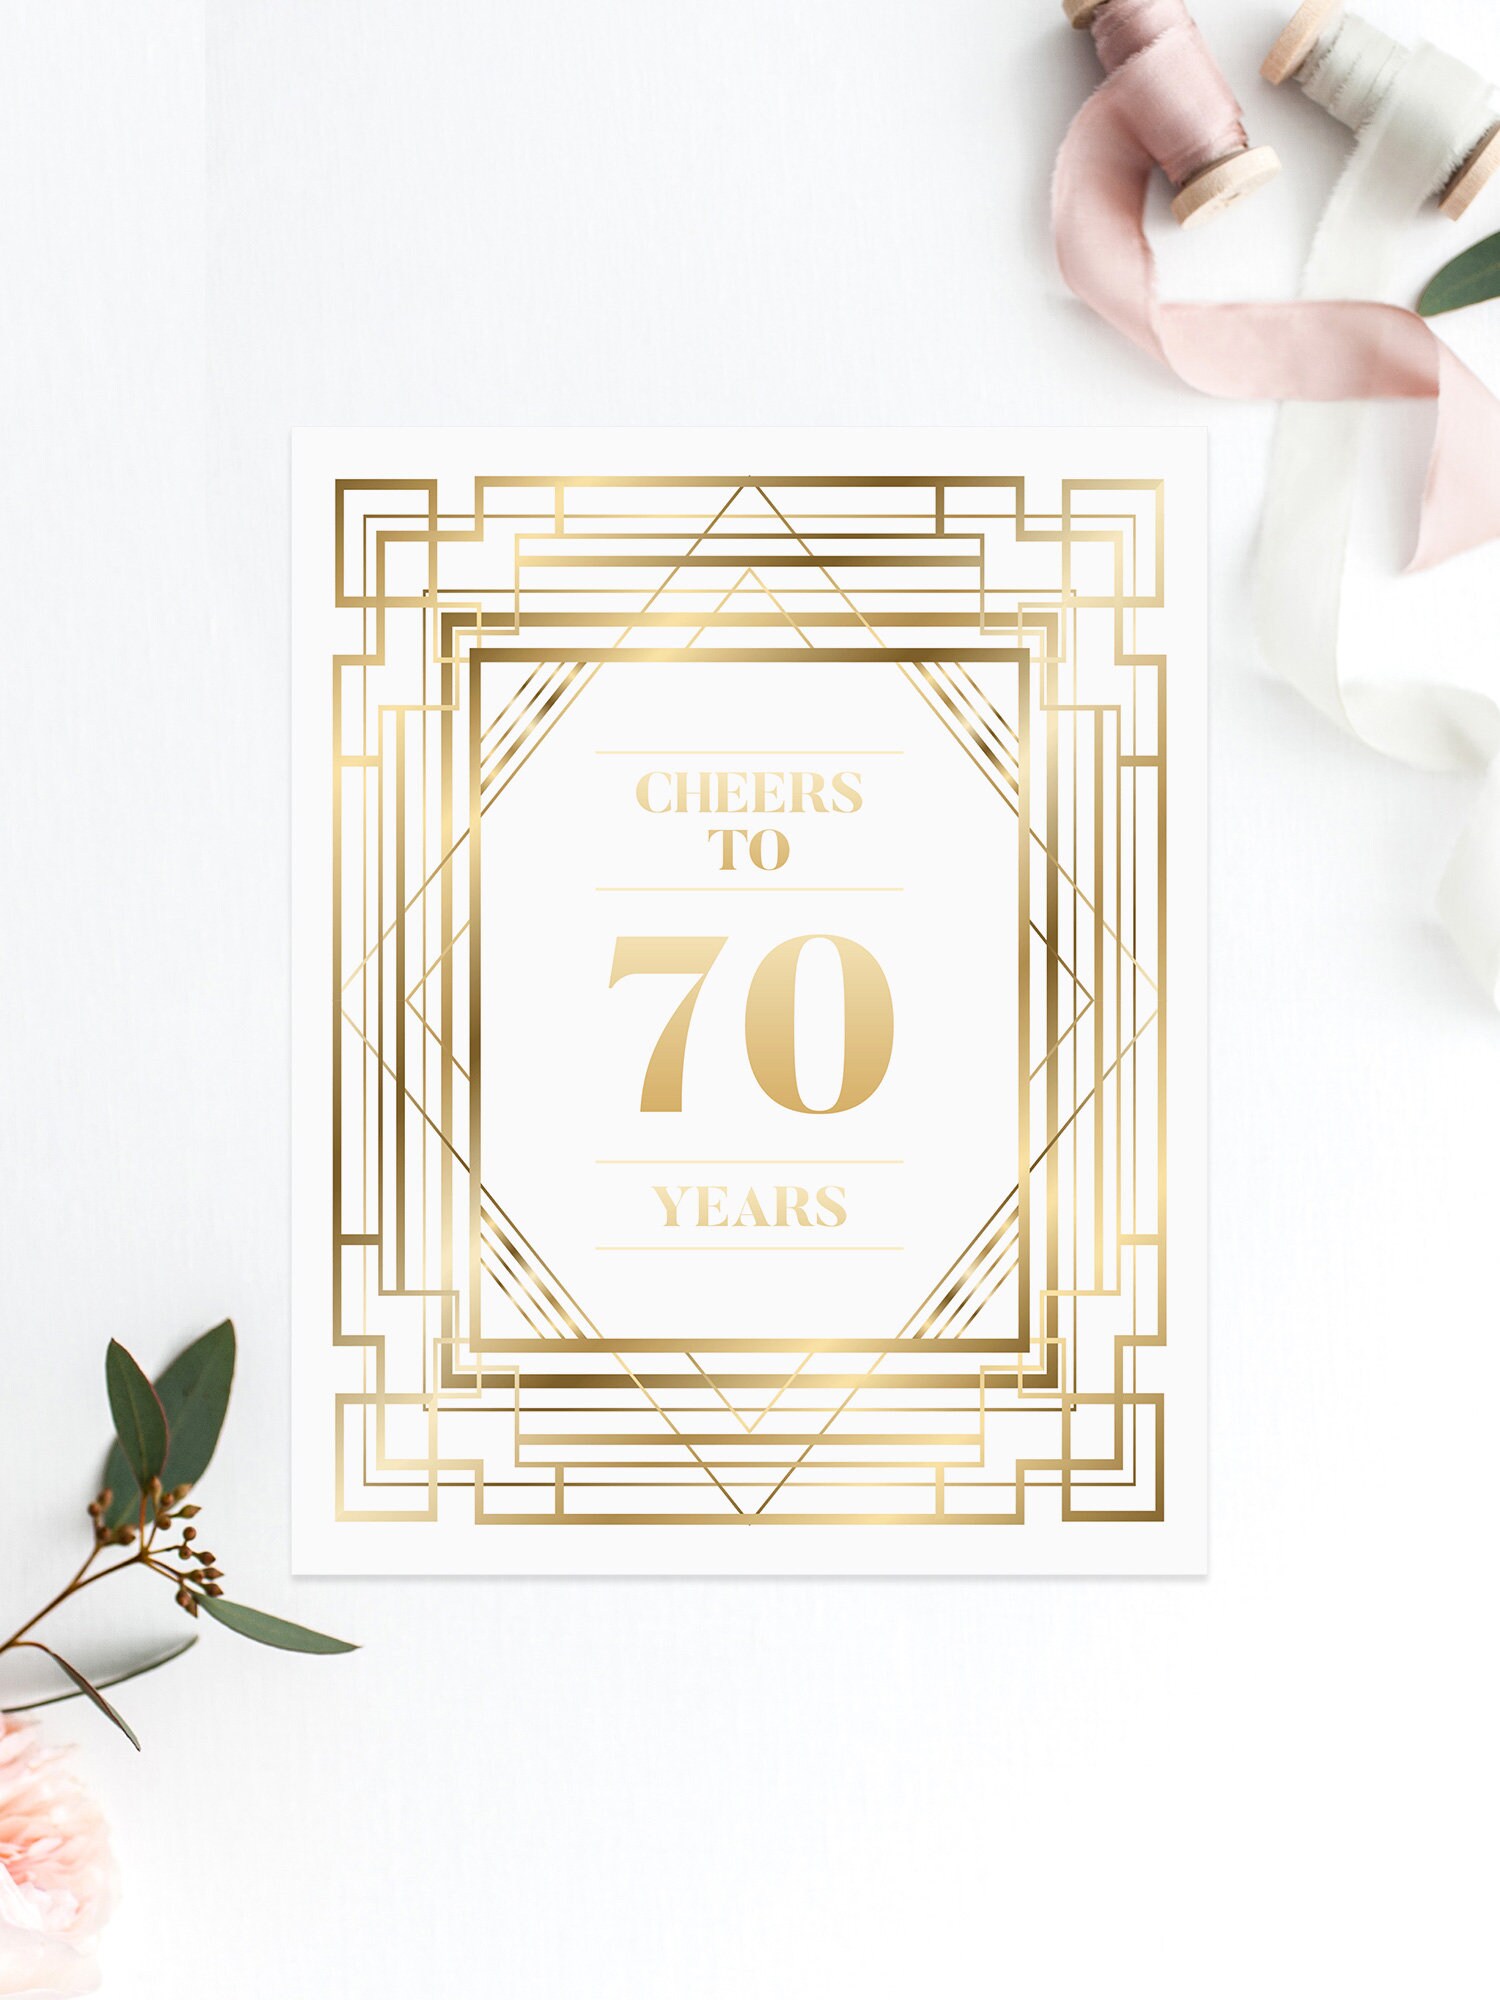 Cheers to 70 years INSTANT DOWNLOAD Printable Gold Foil Sign, Birthday Welcome sign, Anniversary Sign, Retirement, Cheers to Seventy Years